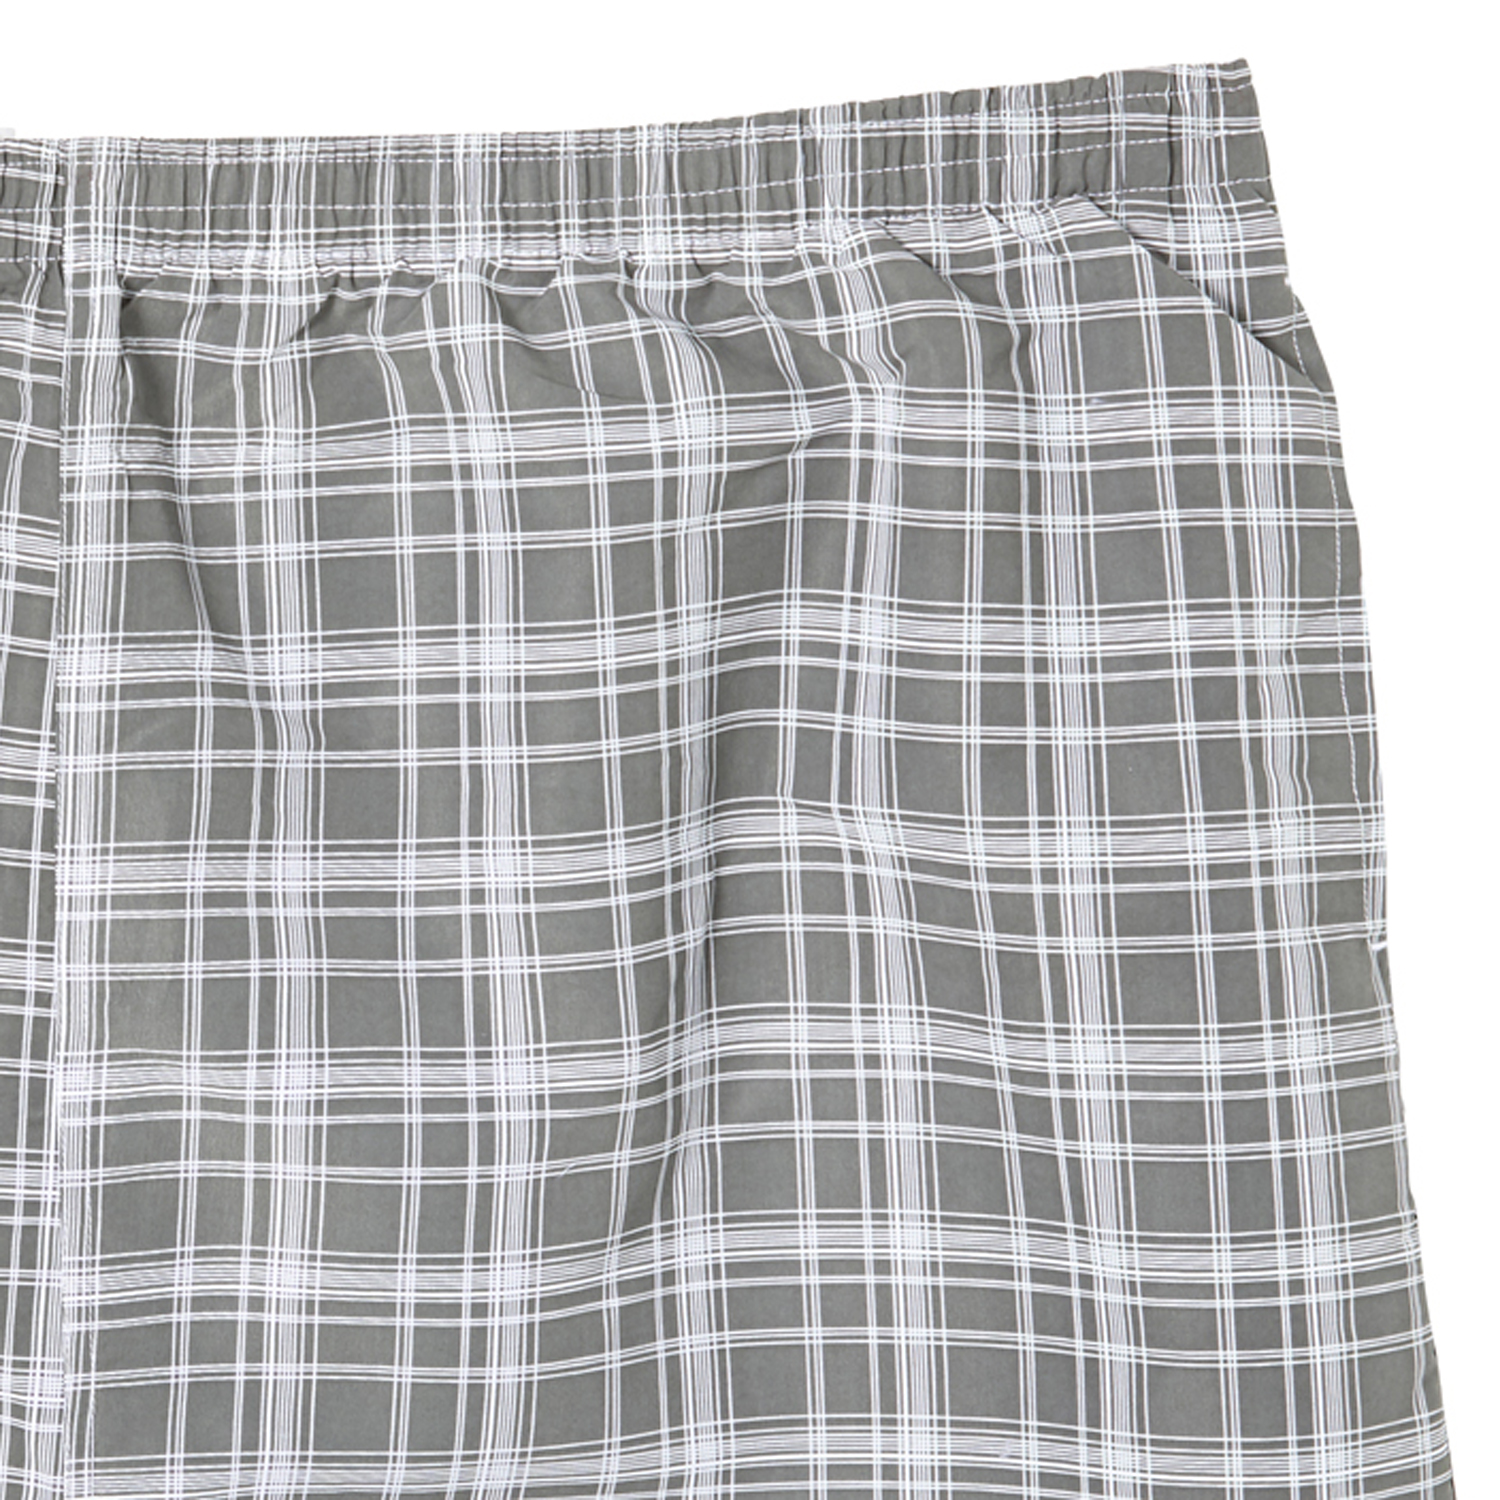 Swim shorts in grey-white checkered by eleMar up to oversize 10XL